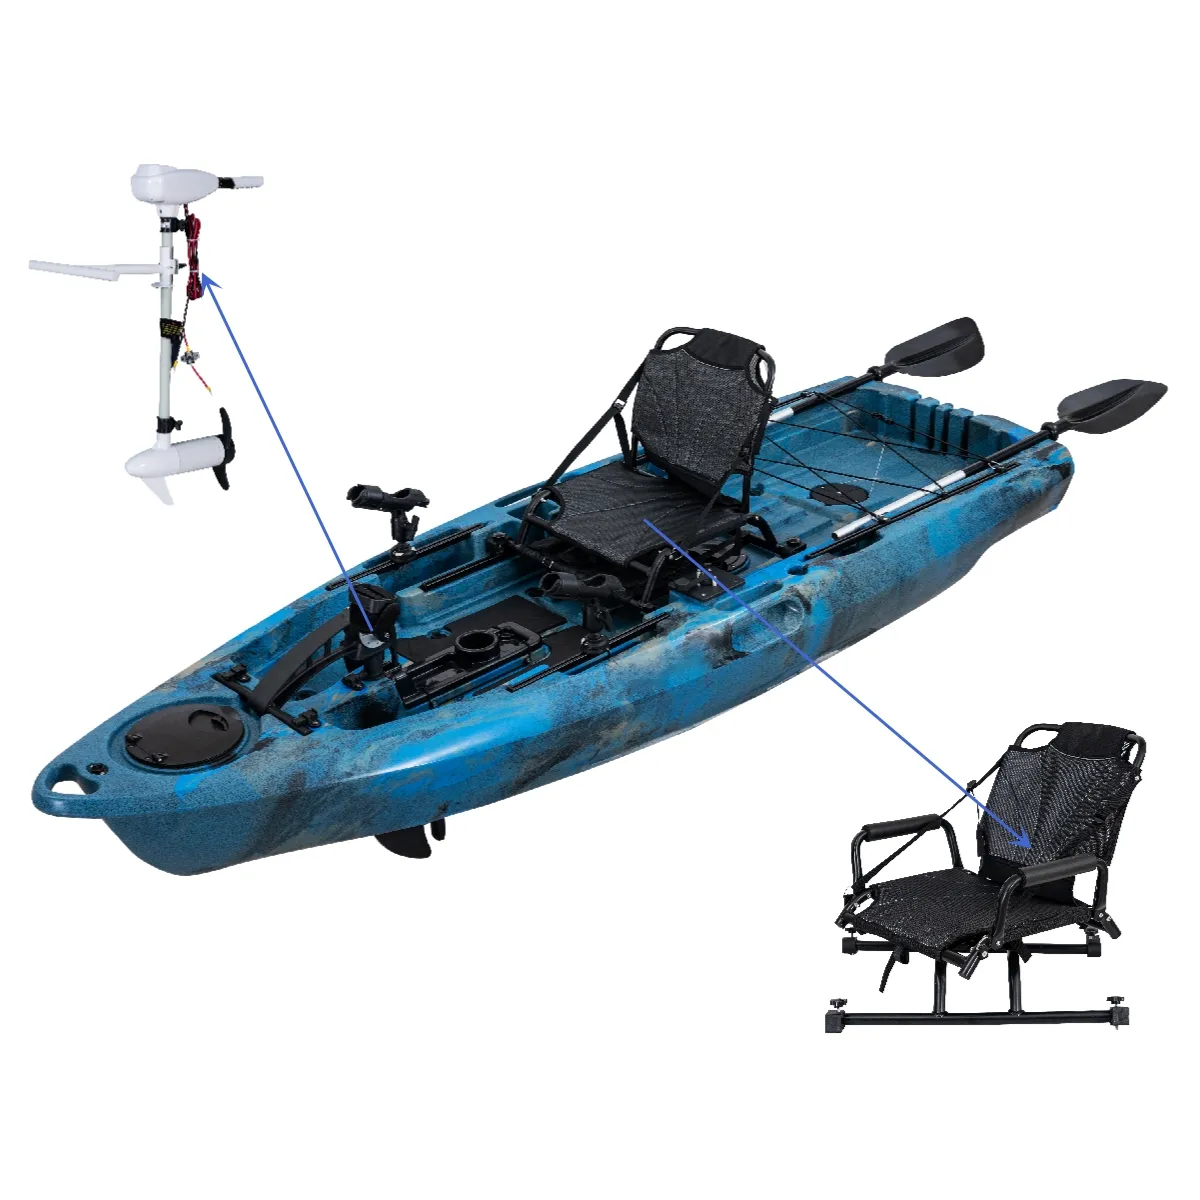 LSF New Plastic Electric Pedal Kayak Boat BigFish 95 PDL With Fishing Accessories